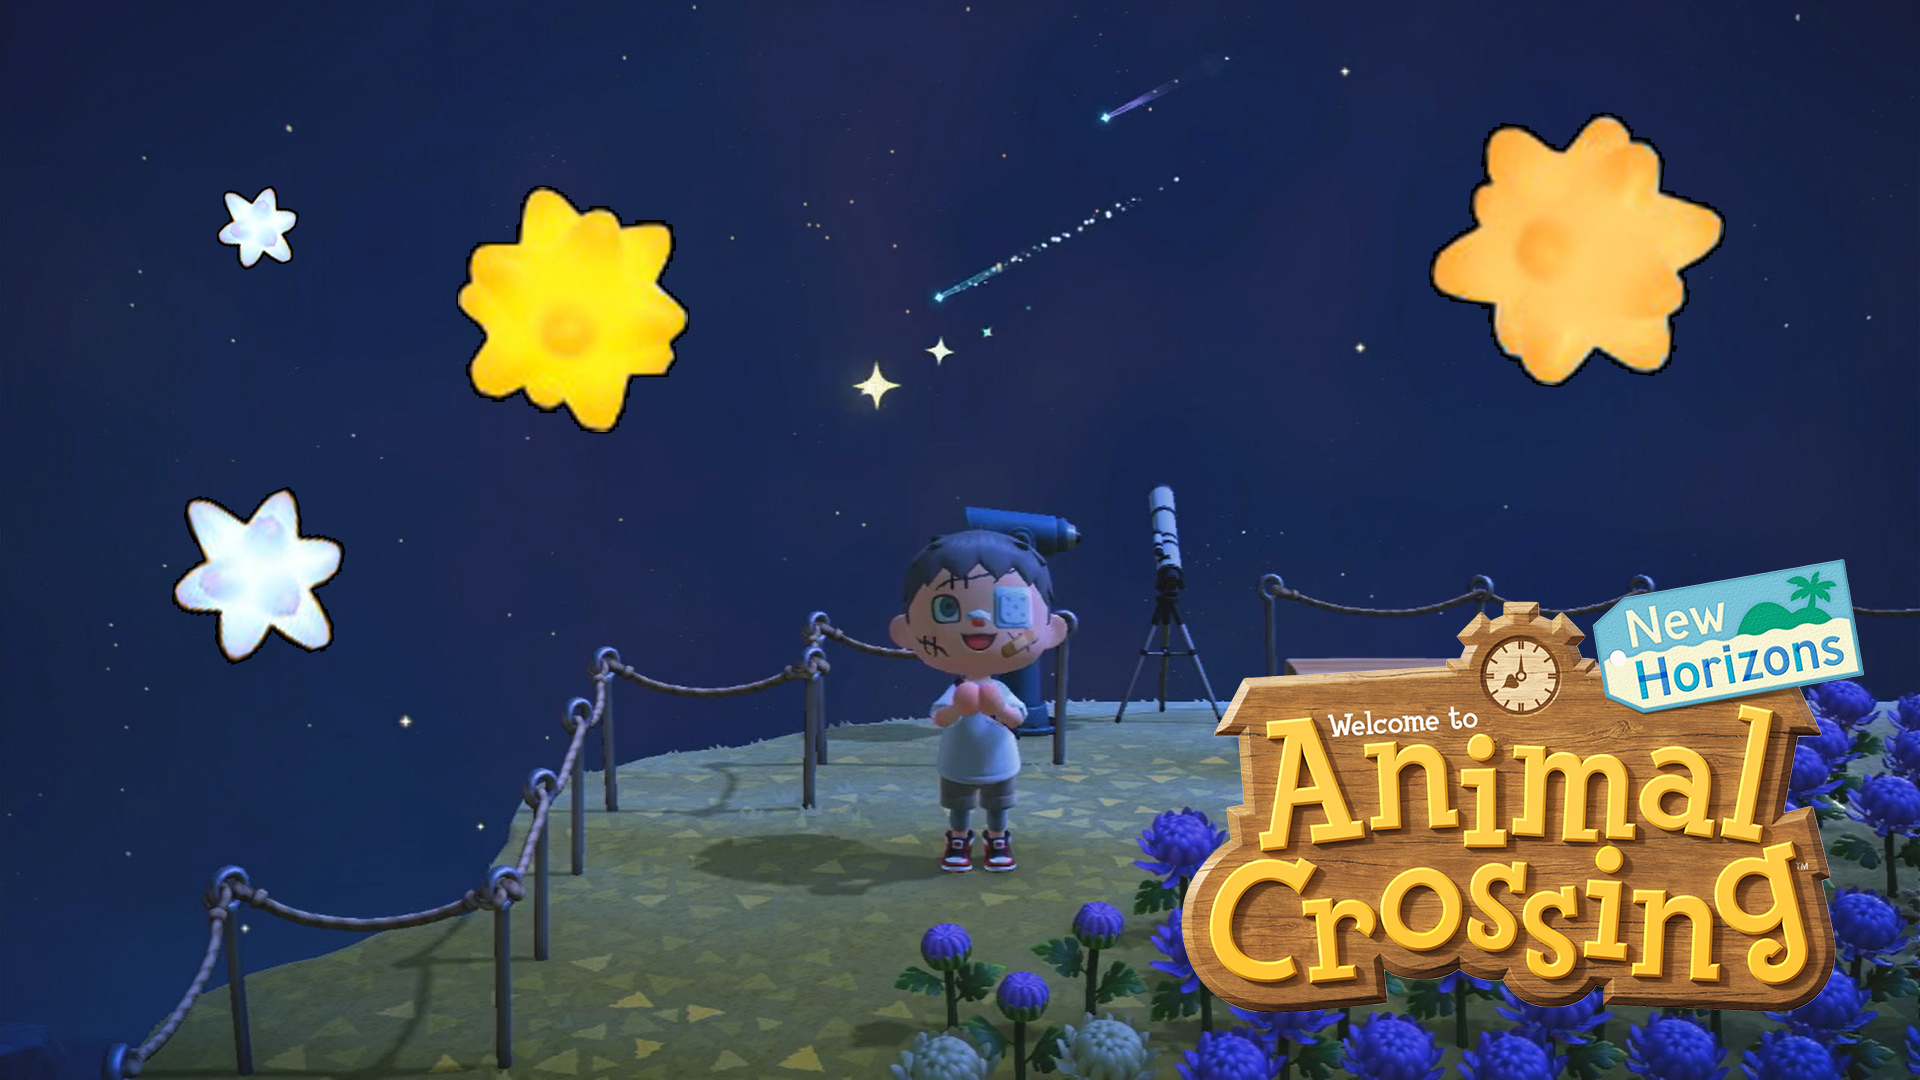 How to Wish on a Star in Animal Crossing New Horizons